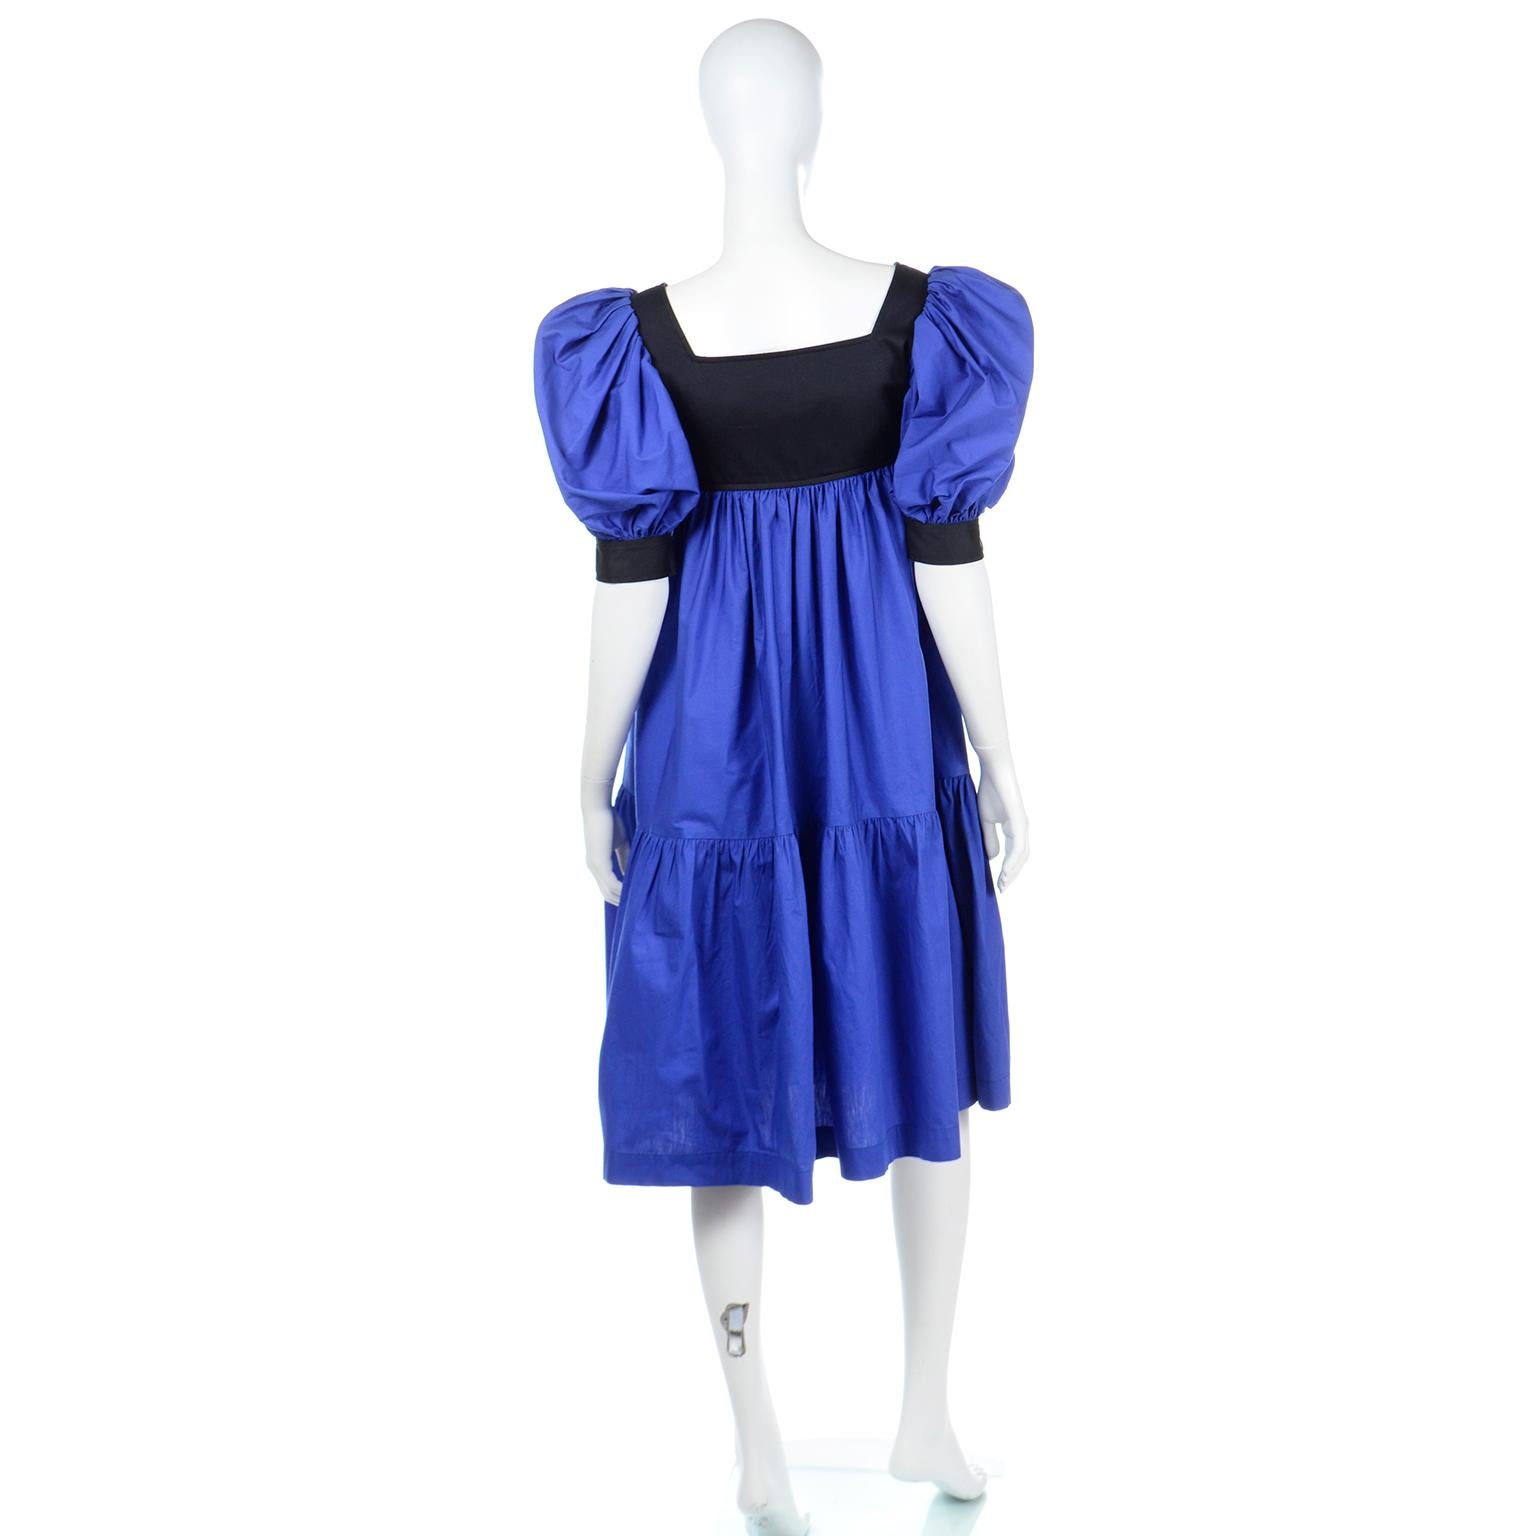 Yves Saint Laurent Blue & Black Cotton Poplin Peasant Style Dress W Puff Sleeves In Excellent Condition For Sale In Portland, OR